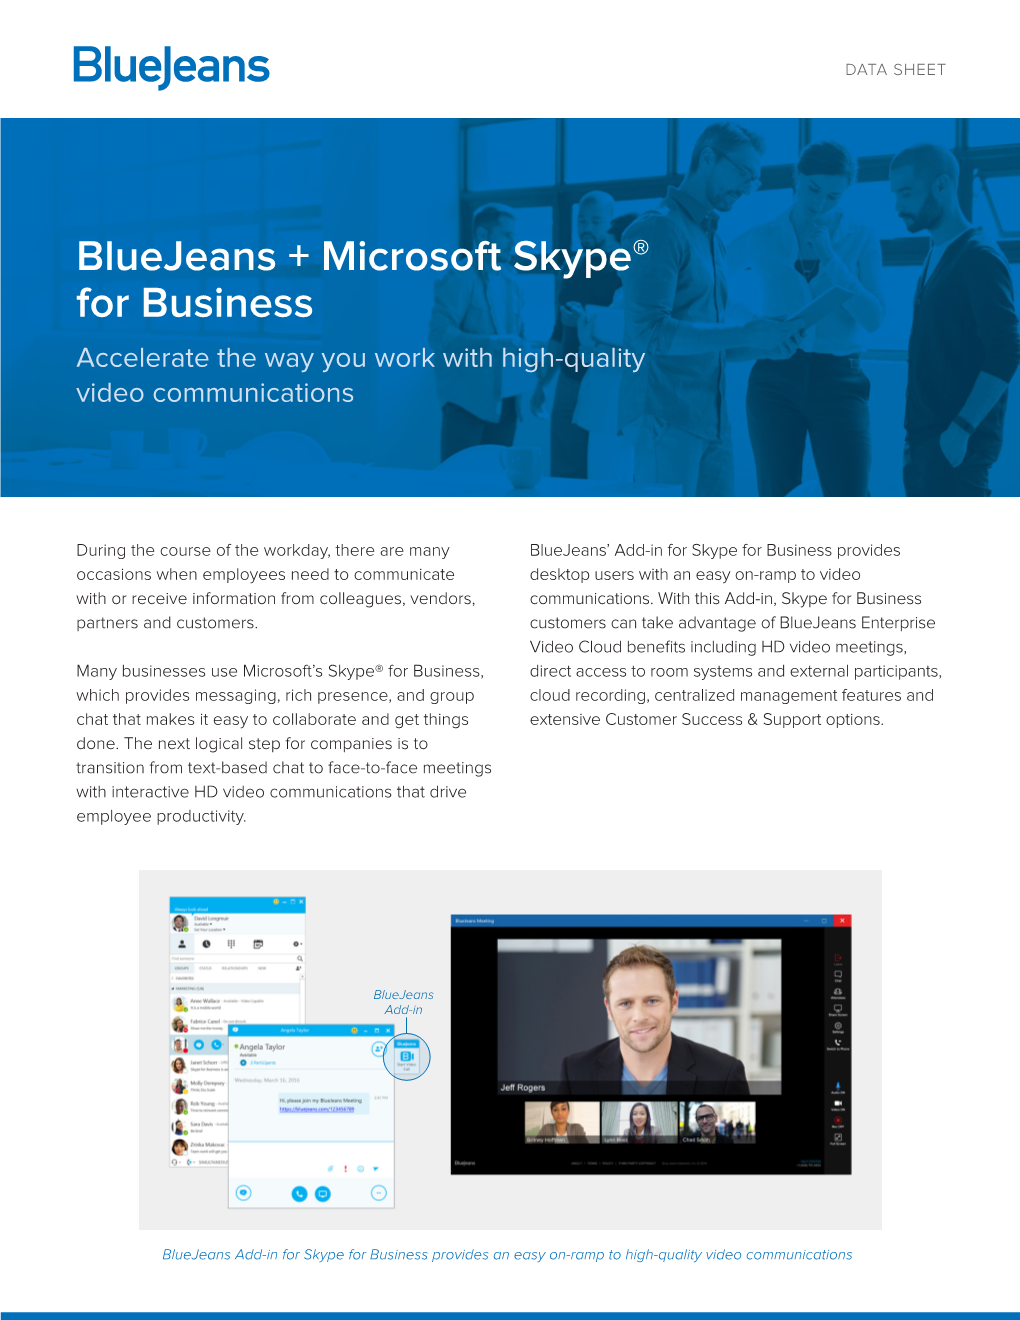 Bluejeans + Microsoft Skype® for Business Accelerate the Way You Work with High-Quality Video Communications